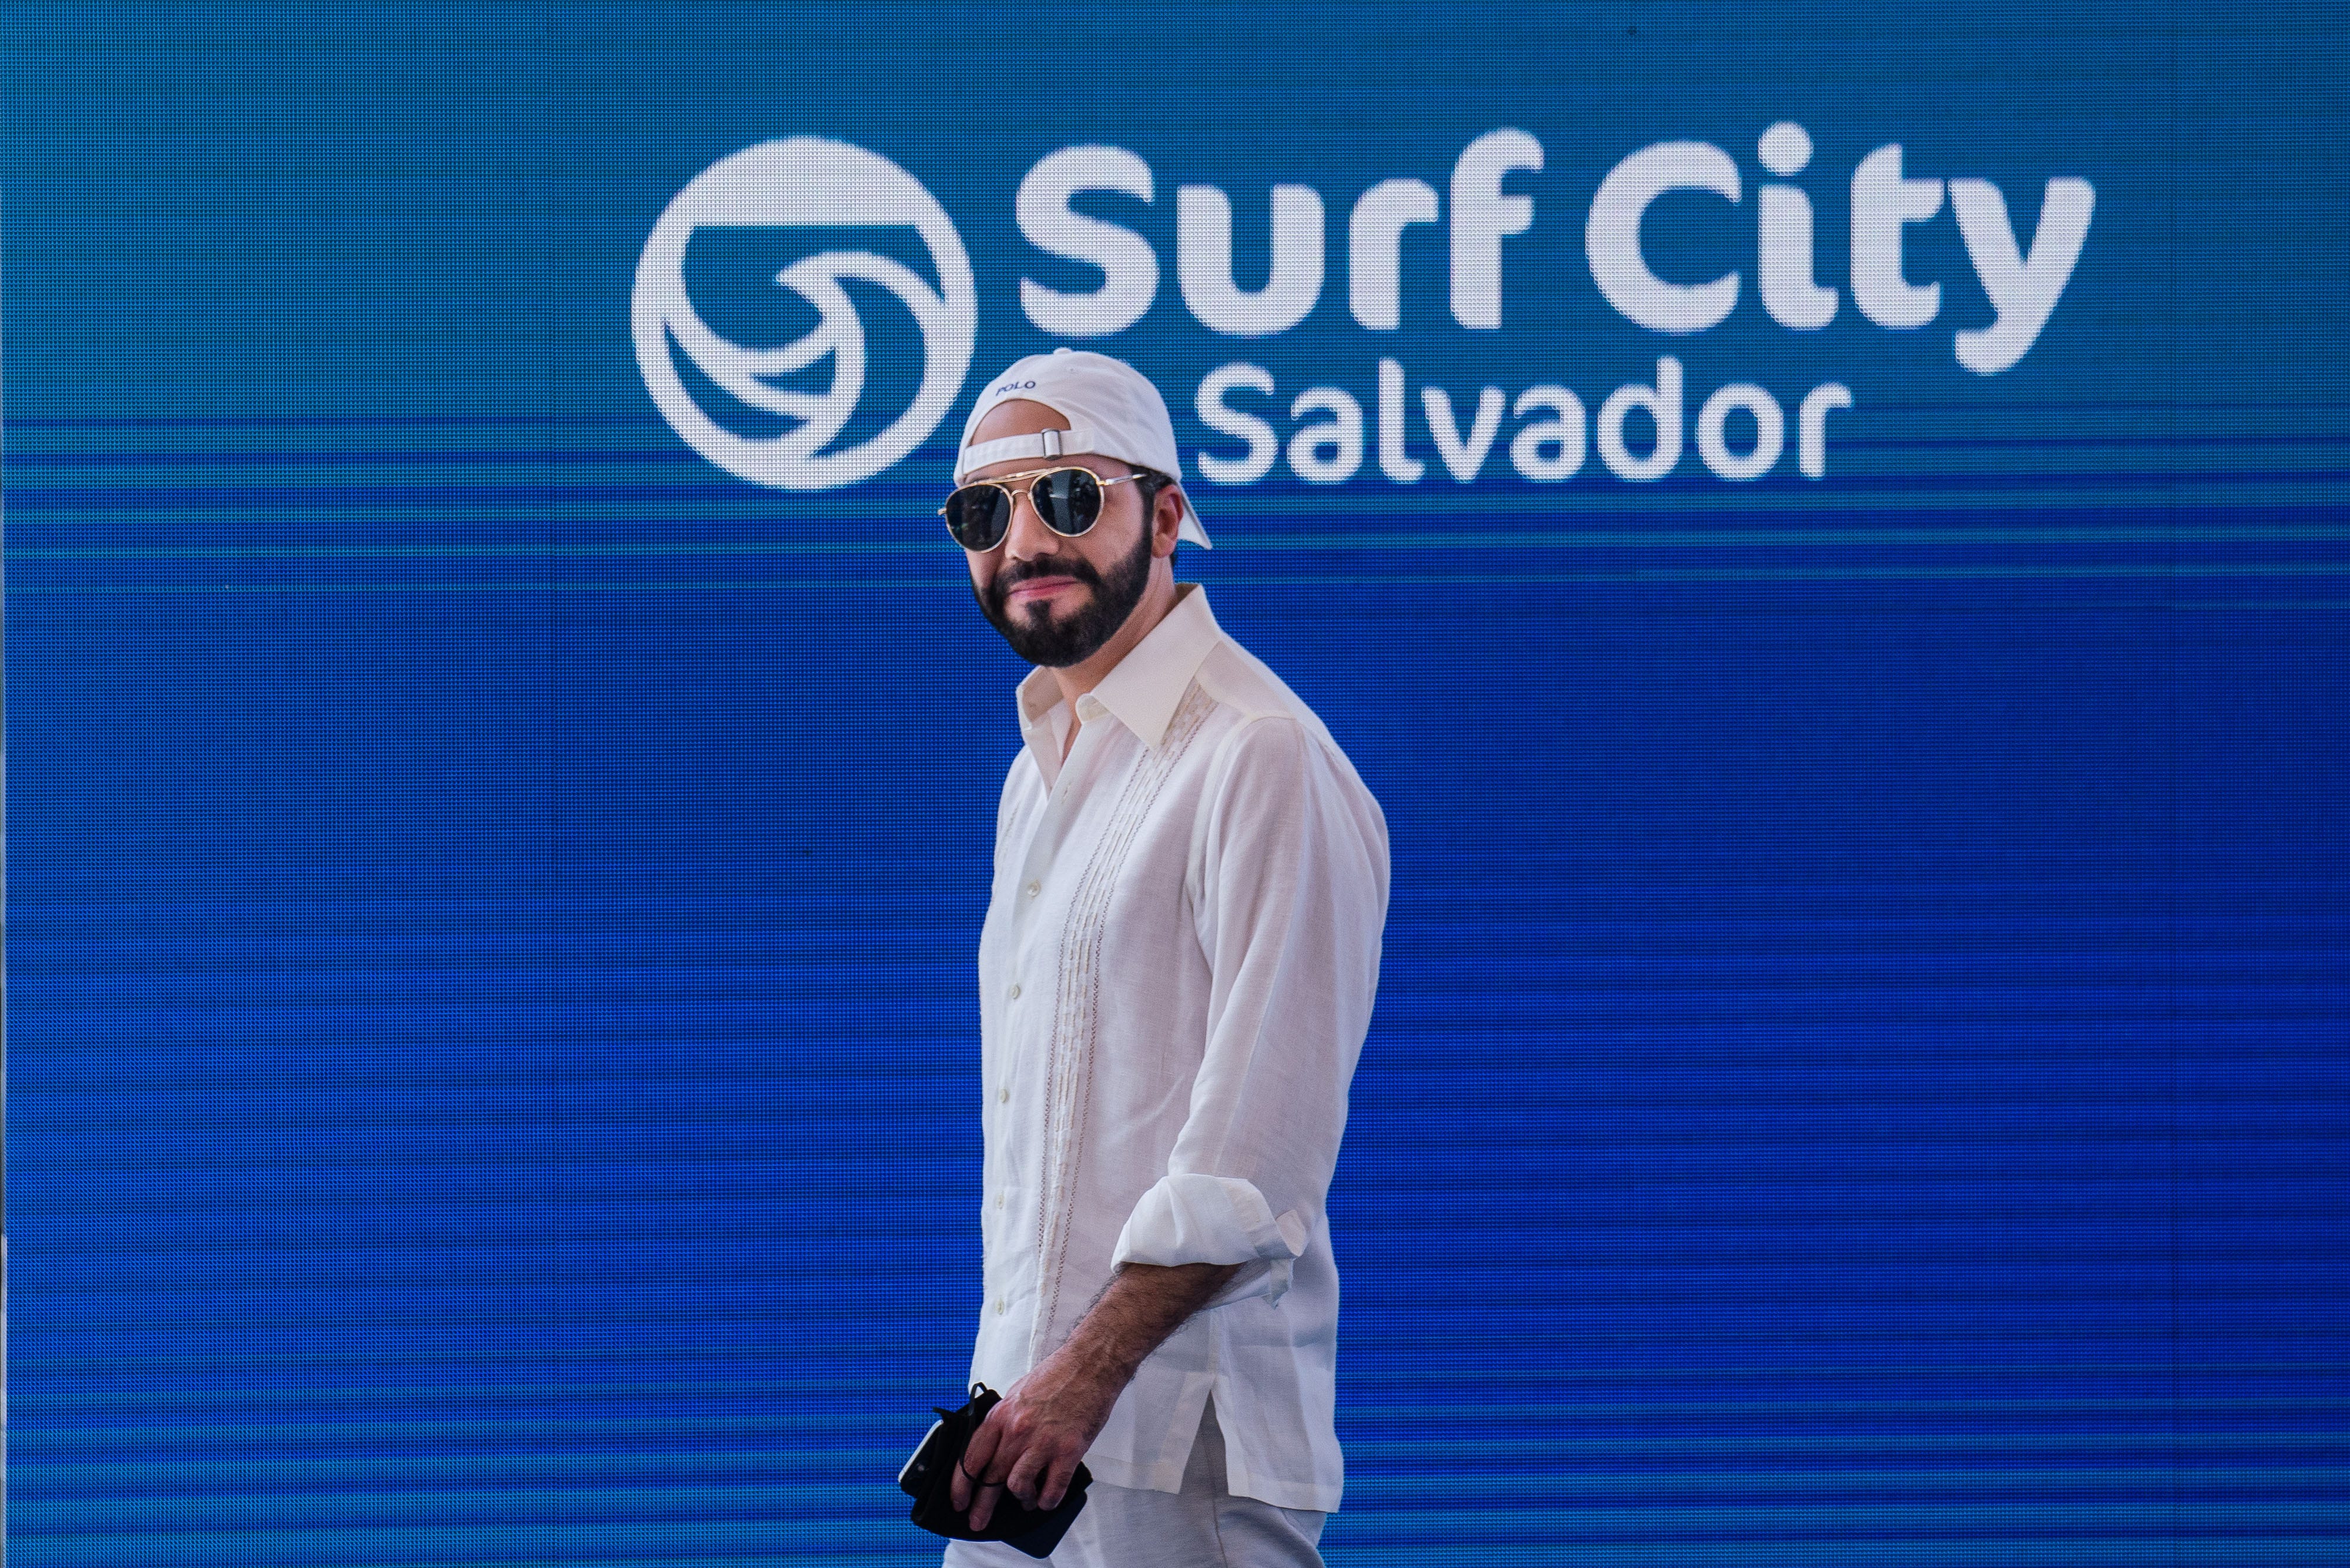 10 Things to Know About the 2023 Surf City El Salvador ISA World Surfing  Games — International Surfing Association